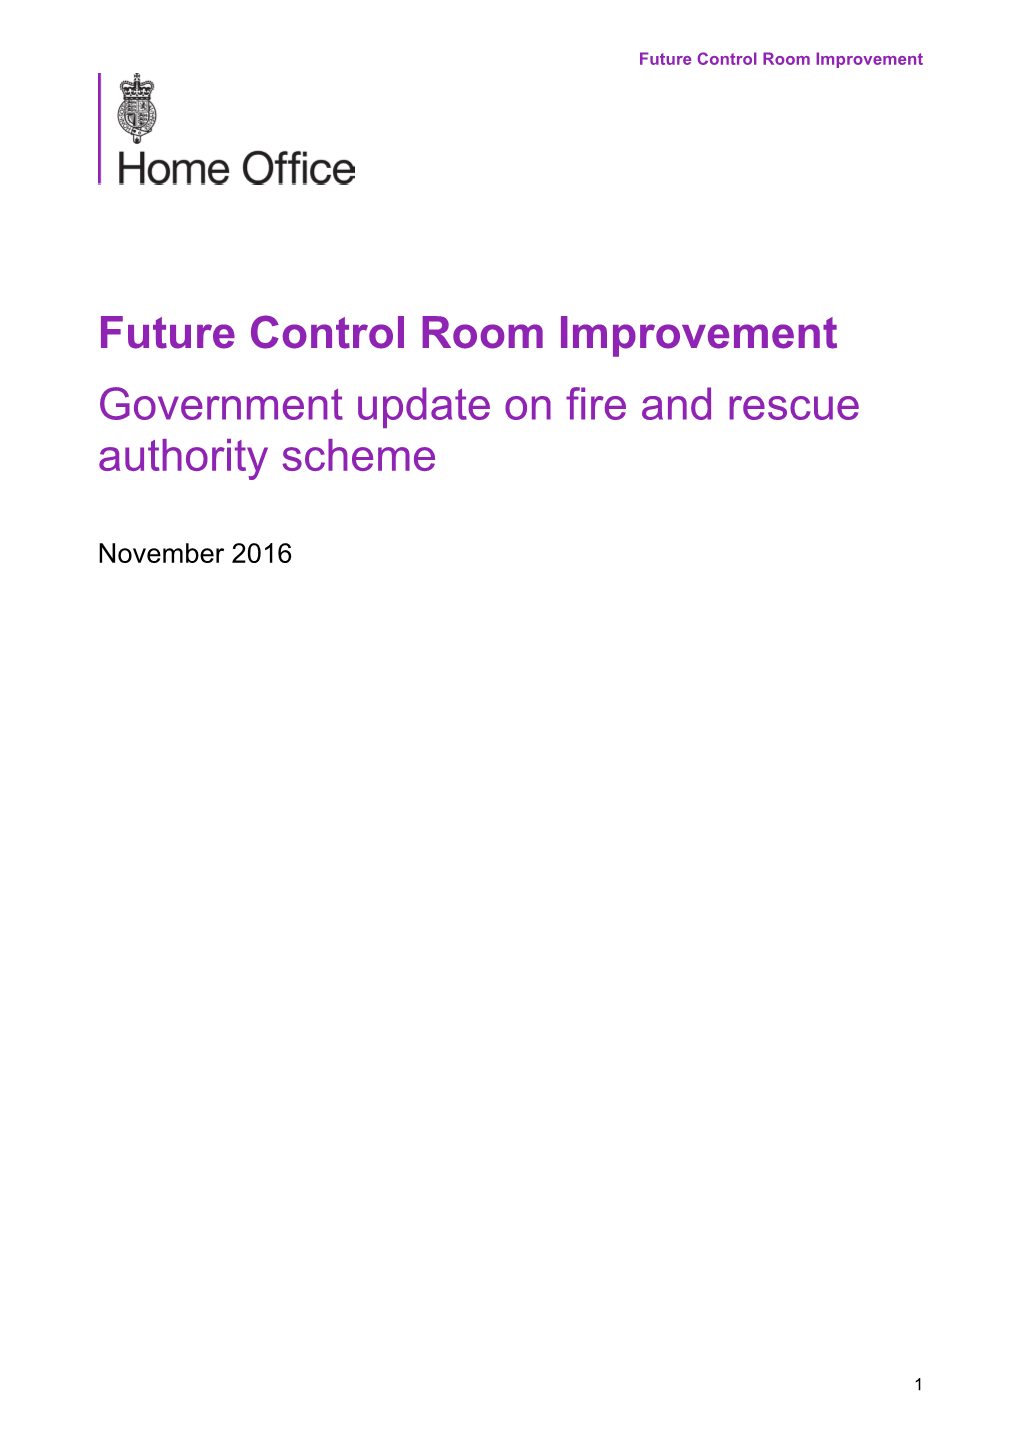 Future Control Room Improvement Government Update on Fire and Rescue Authority Scheme